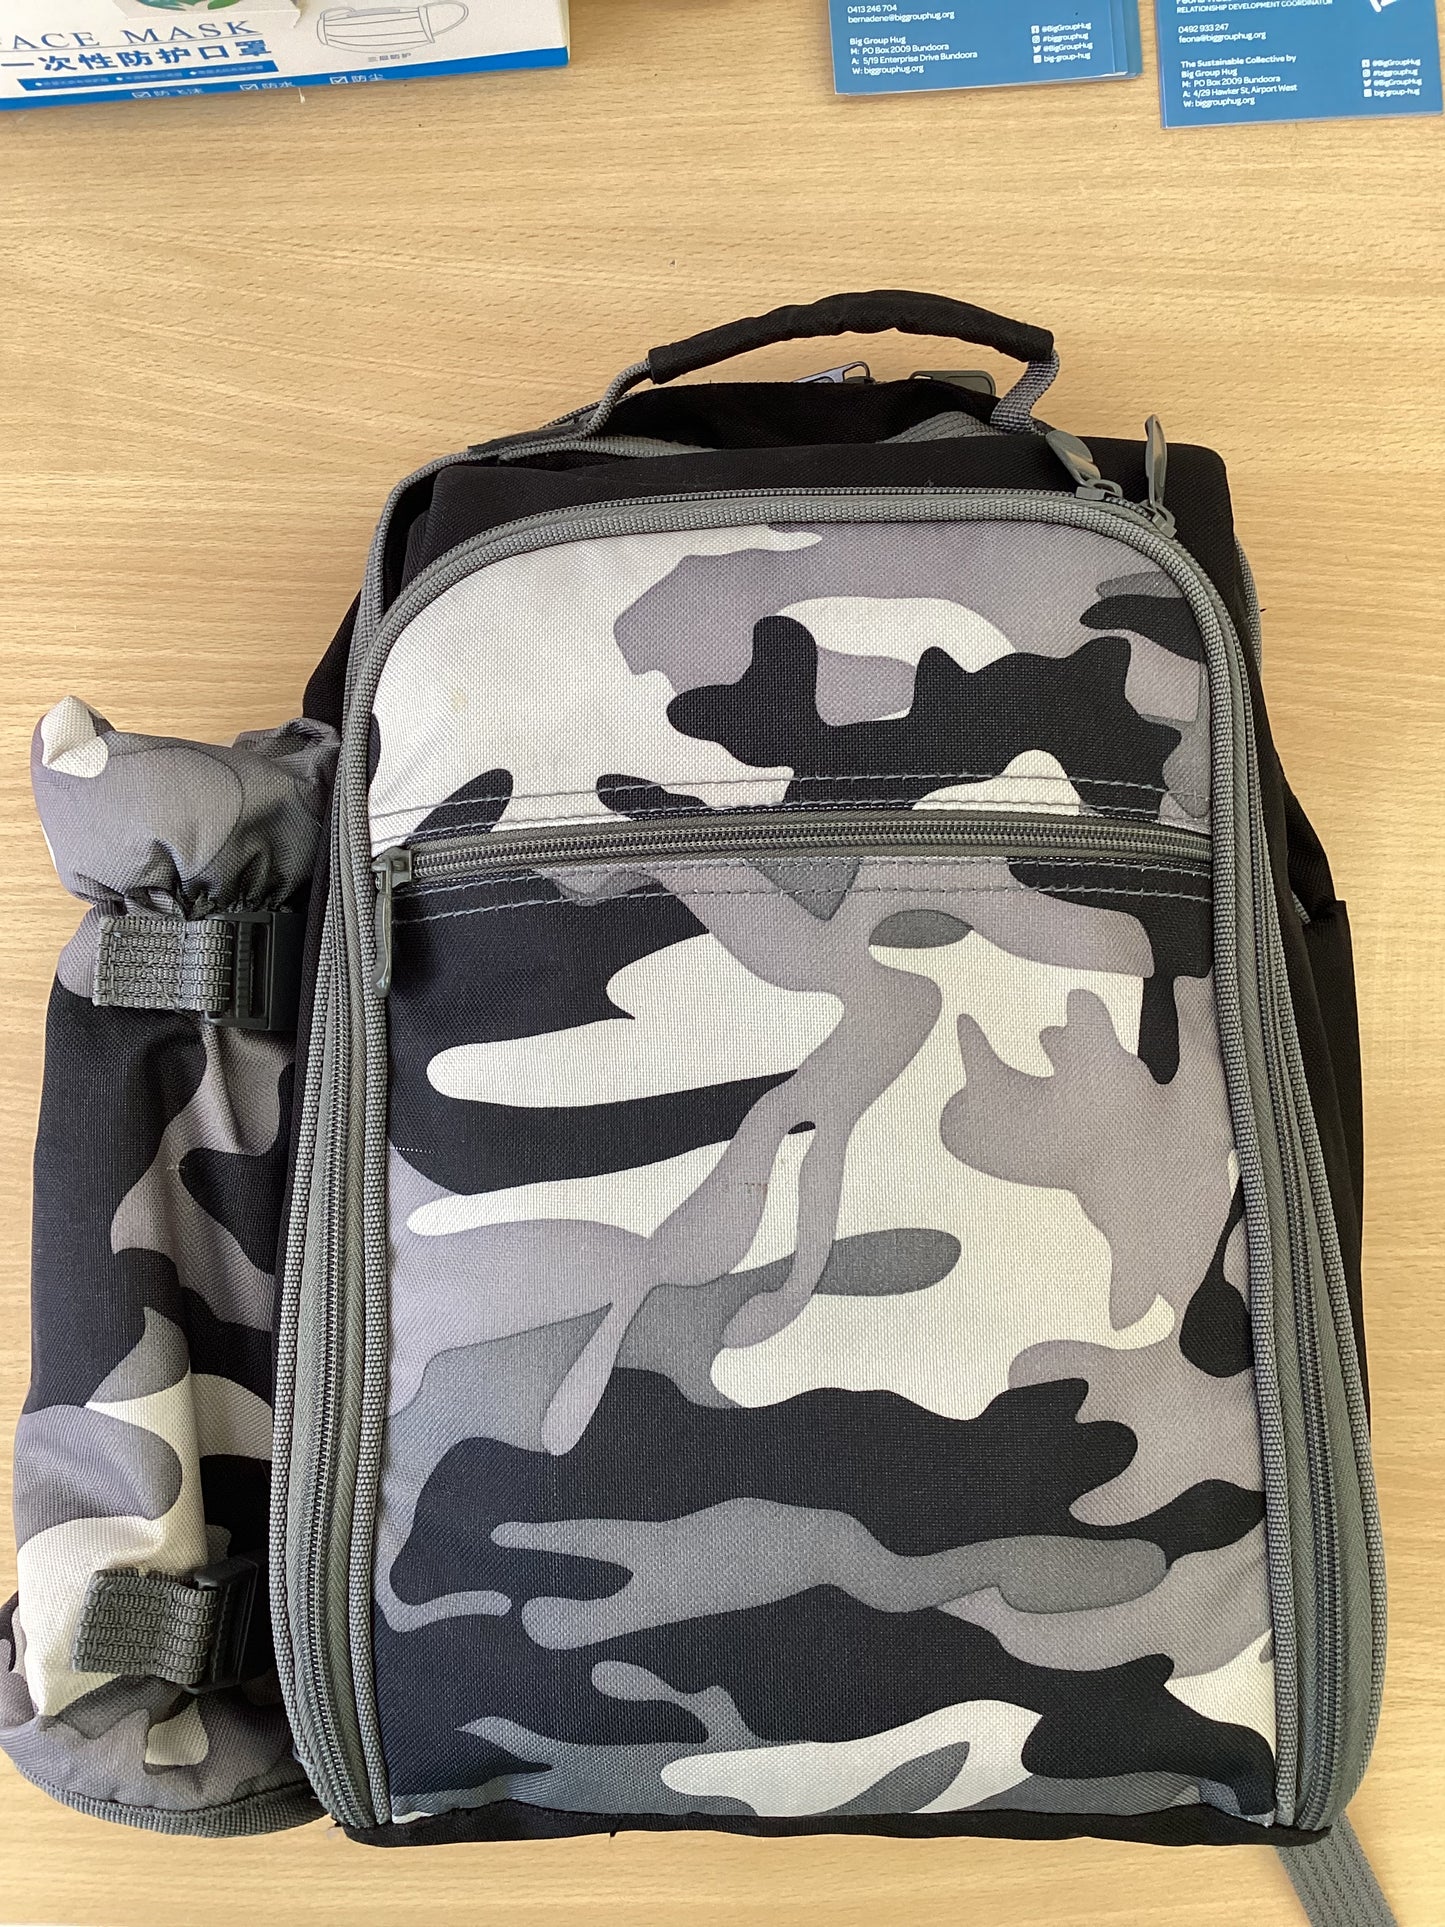 Picnic Camoflauge back pack - includes cutlery, cups, plates, bottle opener